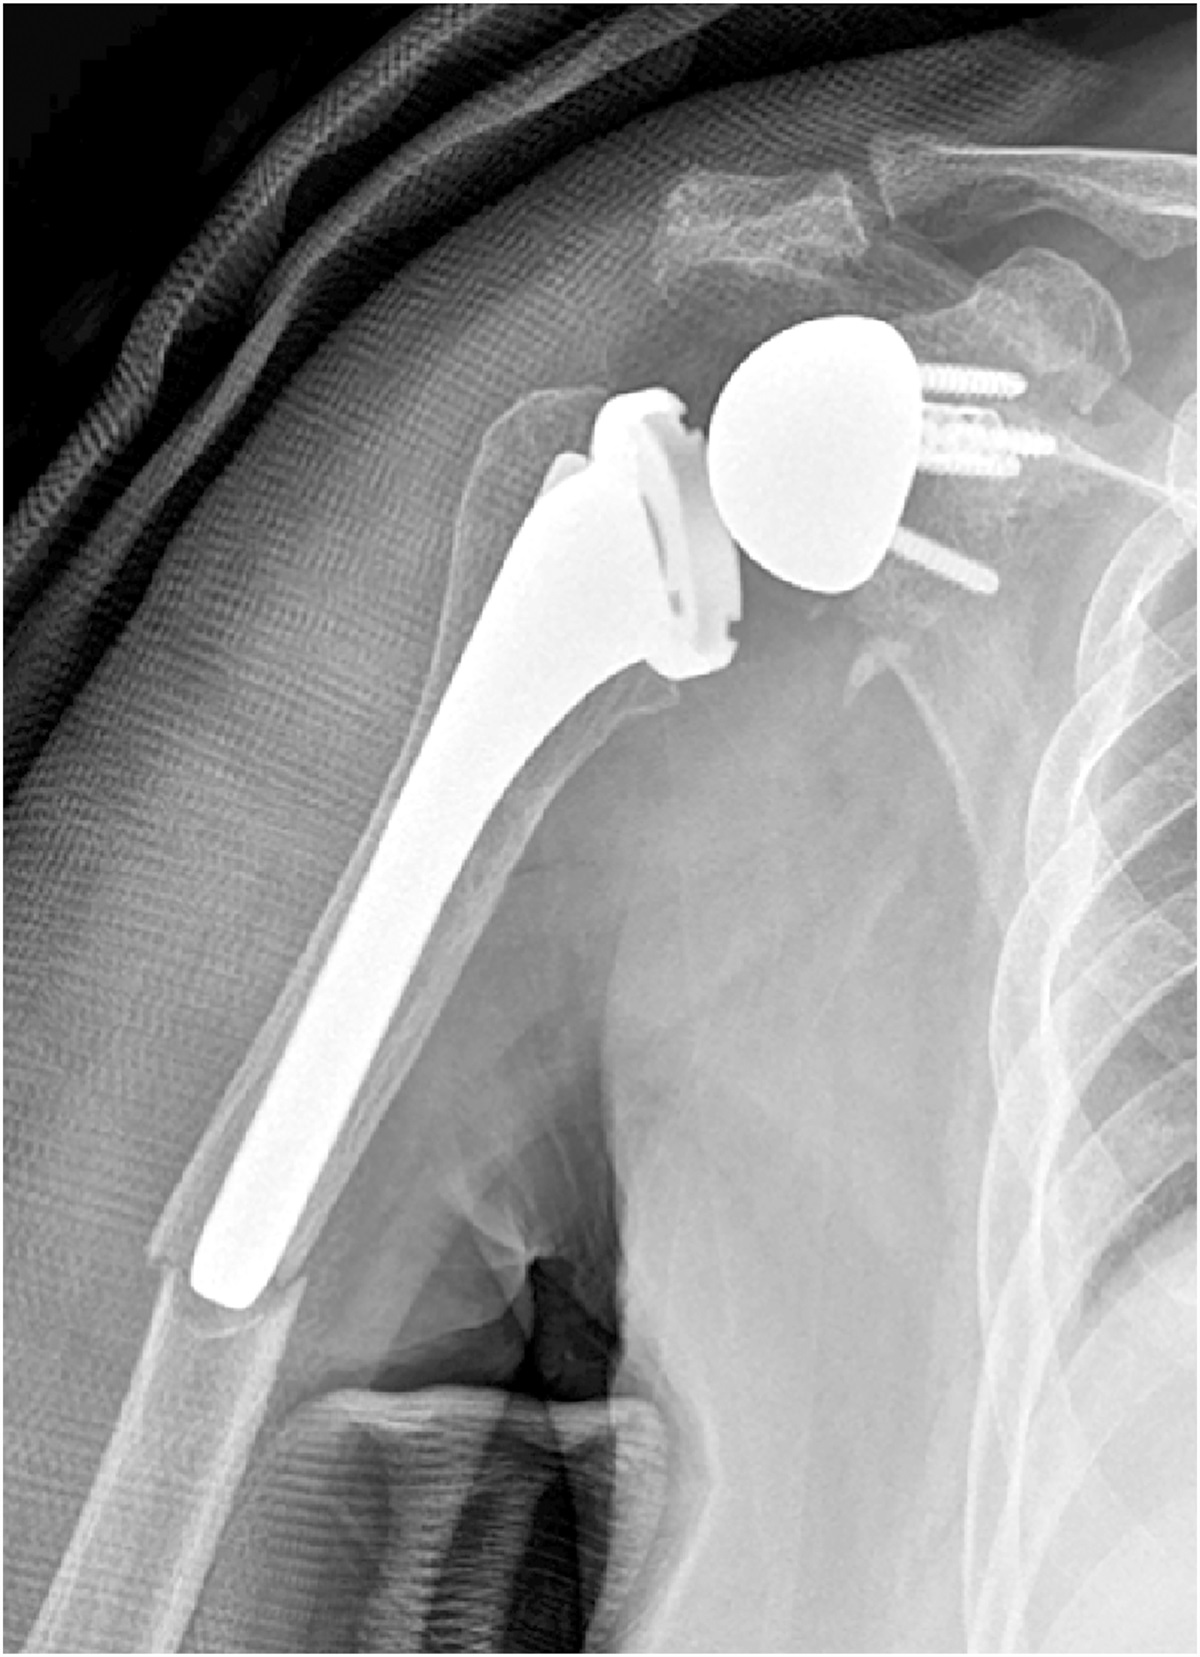 Comparing the Biomechanical Stability of Cerclage Cable with Plate Insert Versus Locking Screw in Periprosthetic Humeral Fracture